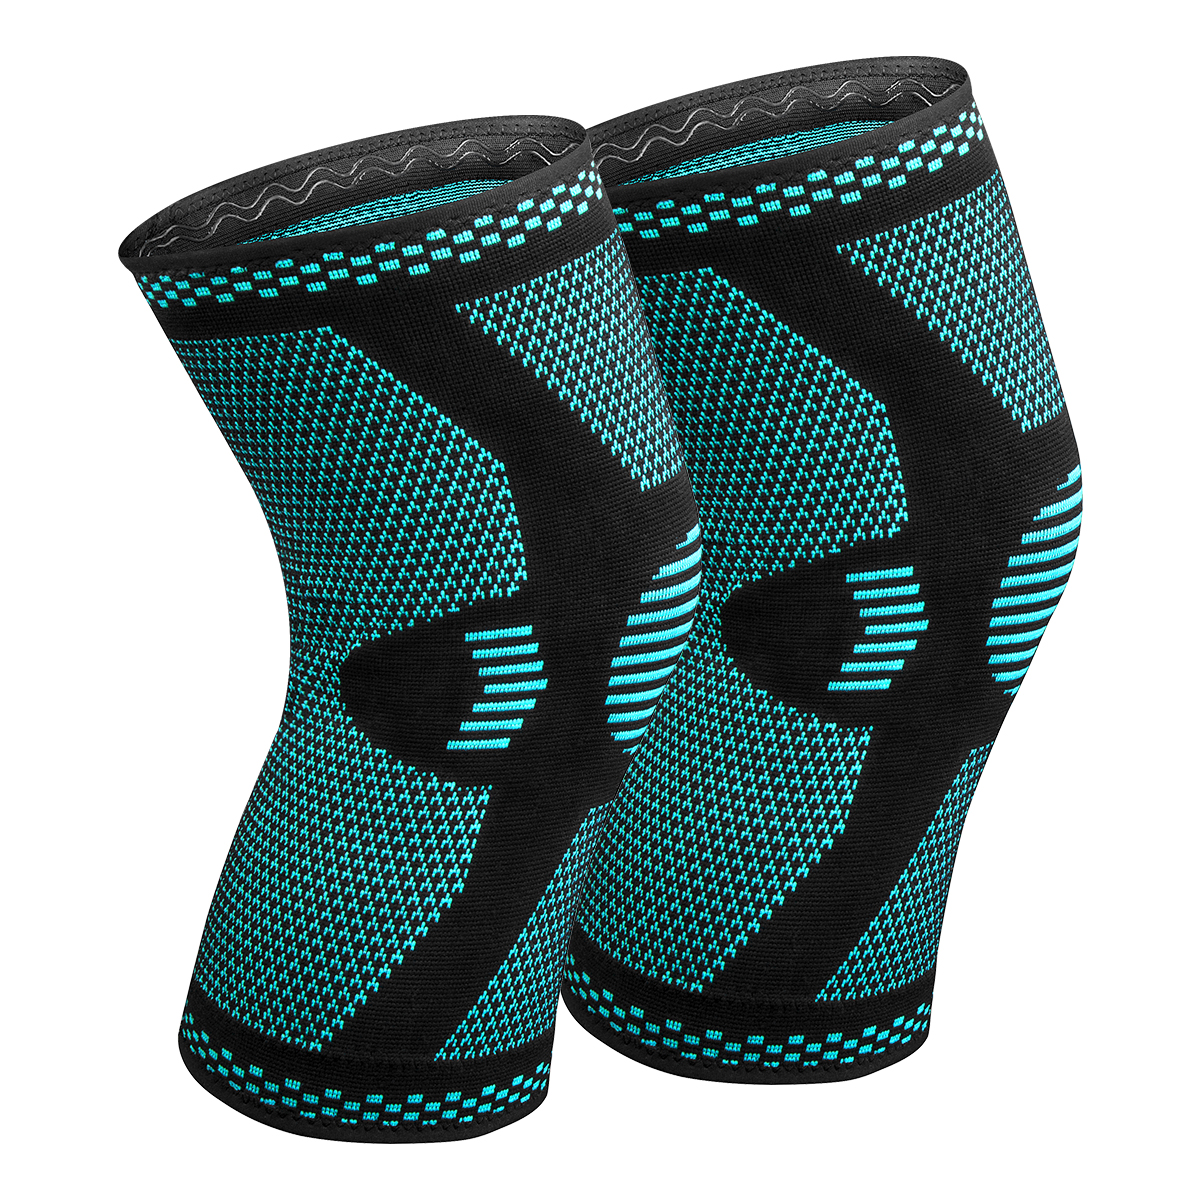 Sports Knee Support